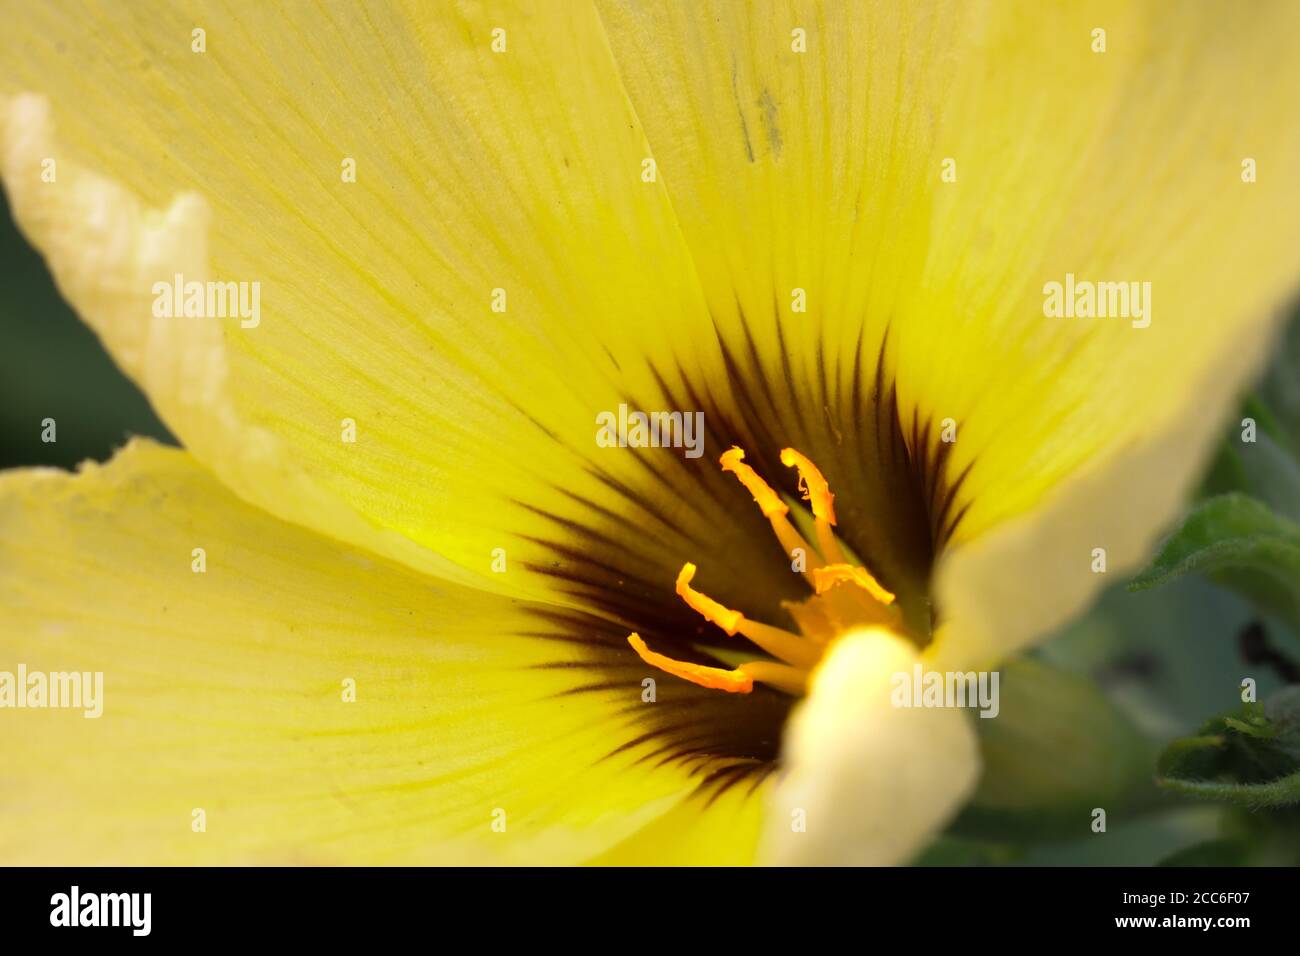 blooming yellow flowers with pale yellow pistils Stock Photo